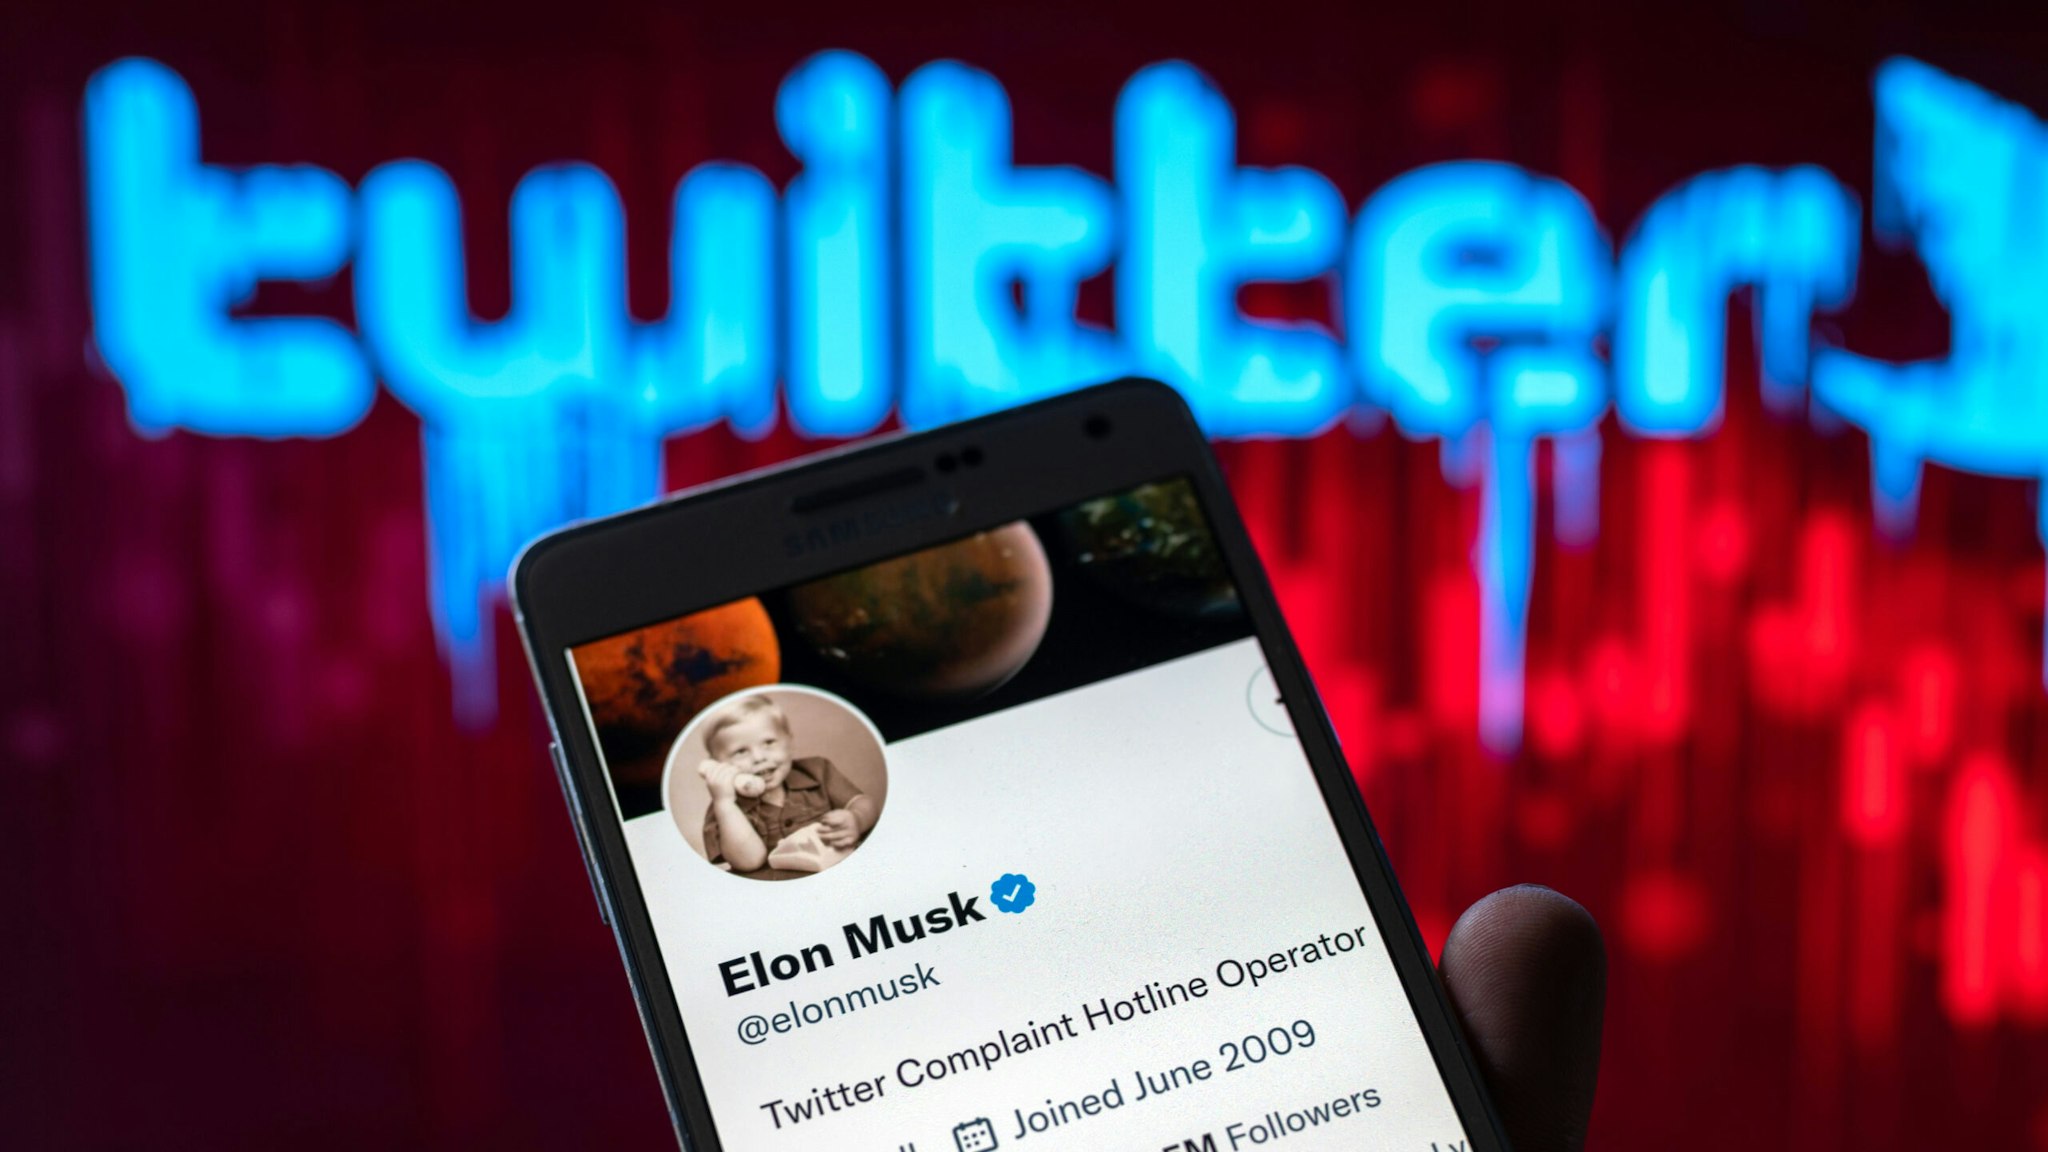 Elon Musk's Twitter account displayed on a screen are seen in this illustration. In Brussels - Belgium on 06 November 2022.